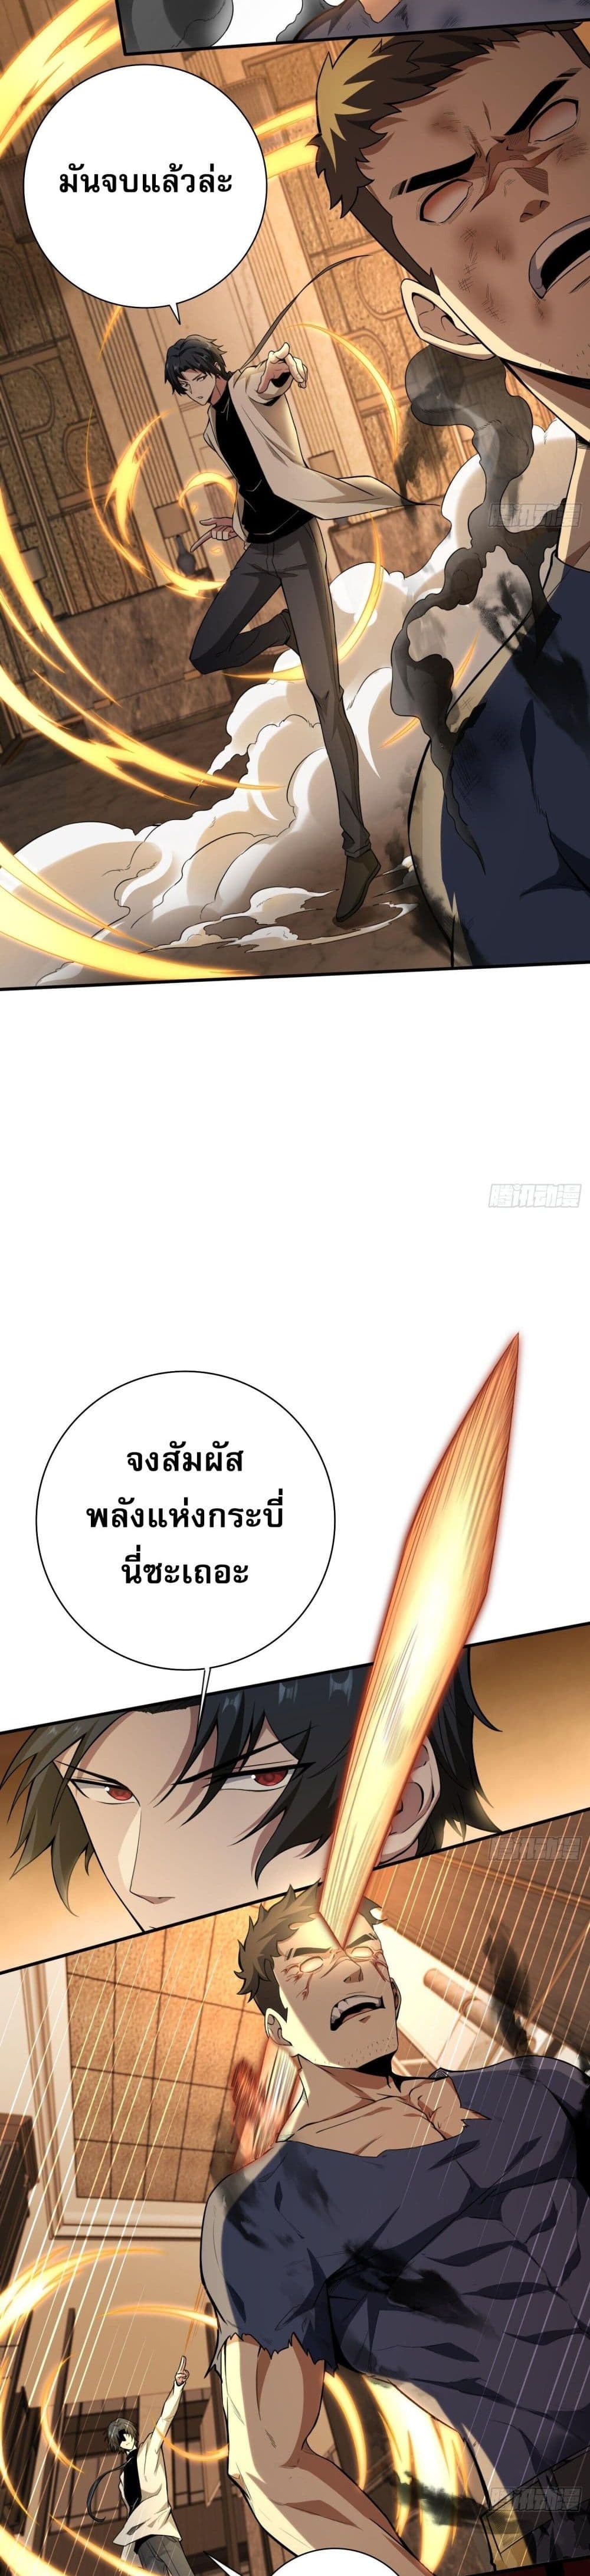 The All-Knowing Cultivator ผู้ฝึกตนผู้รอบรู้ 16/21